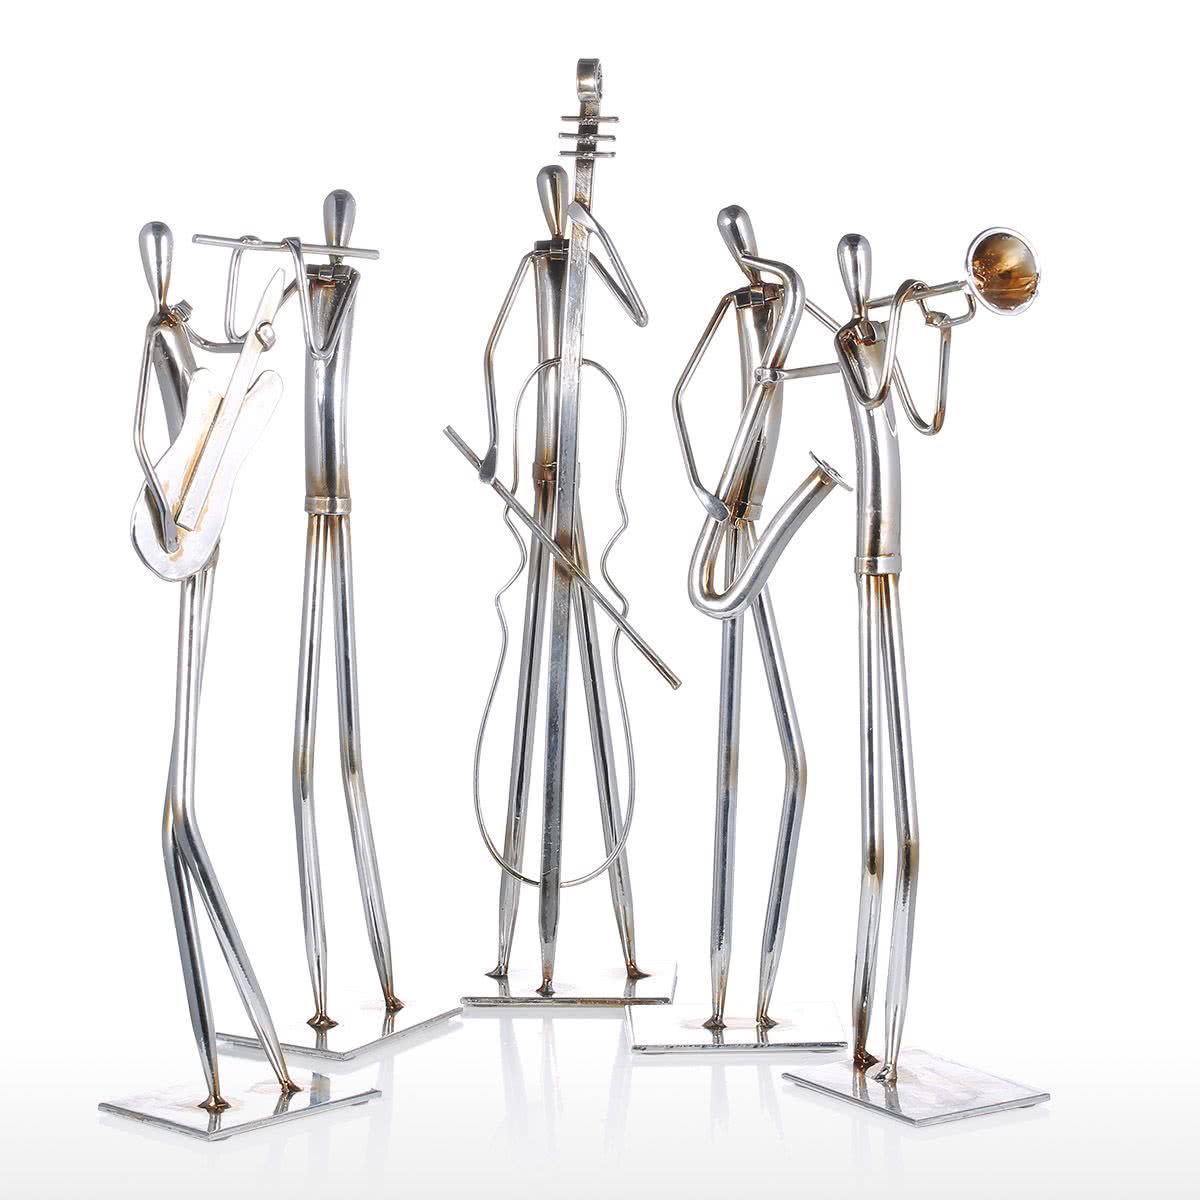 Gifts for Music Lovers and Music Gifts with Orchestra for Home Decor